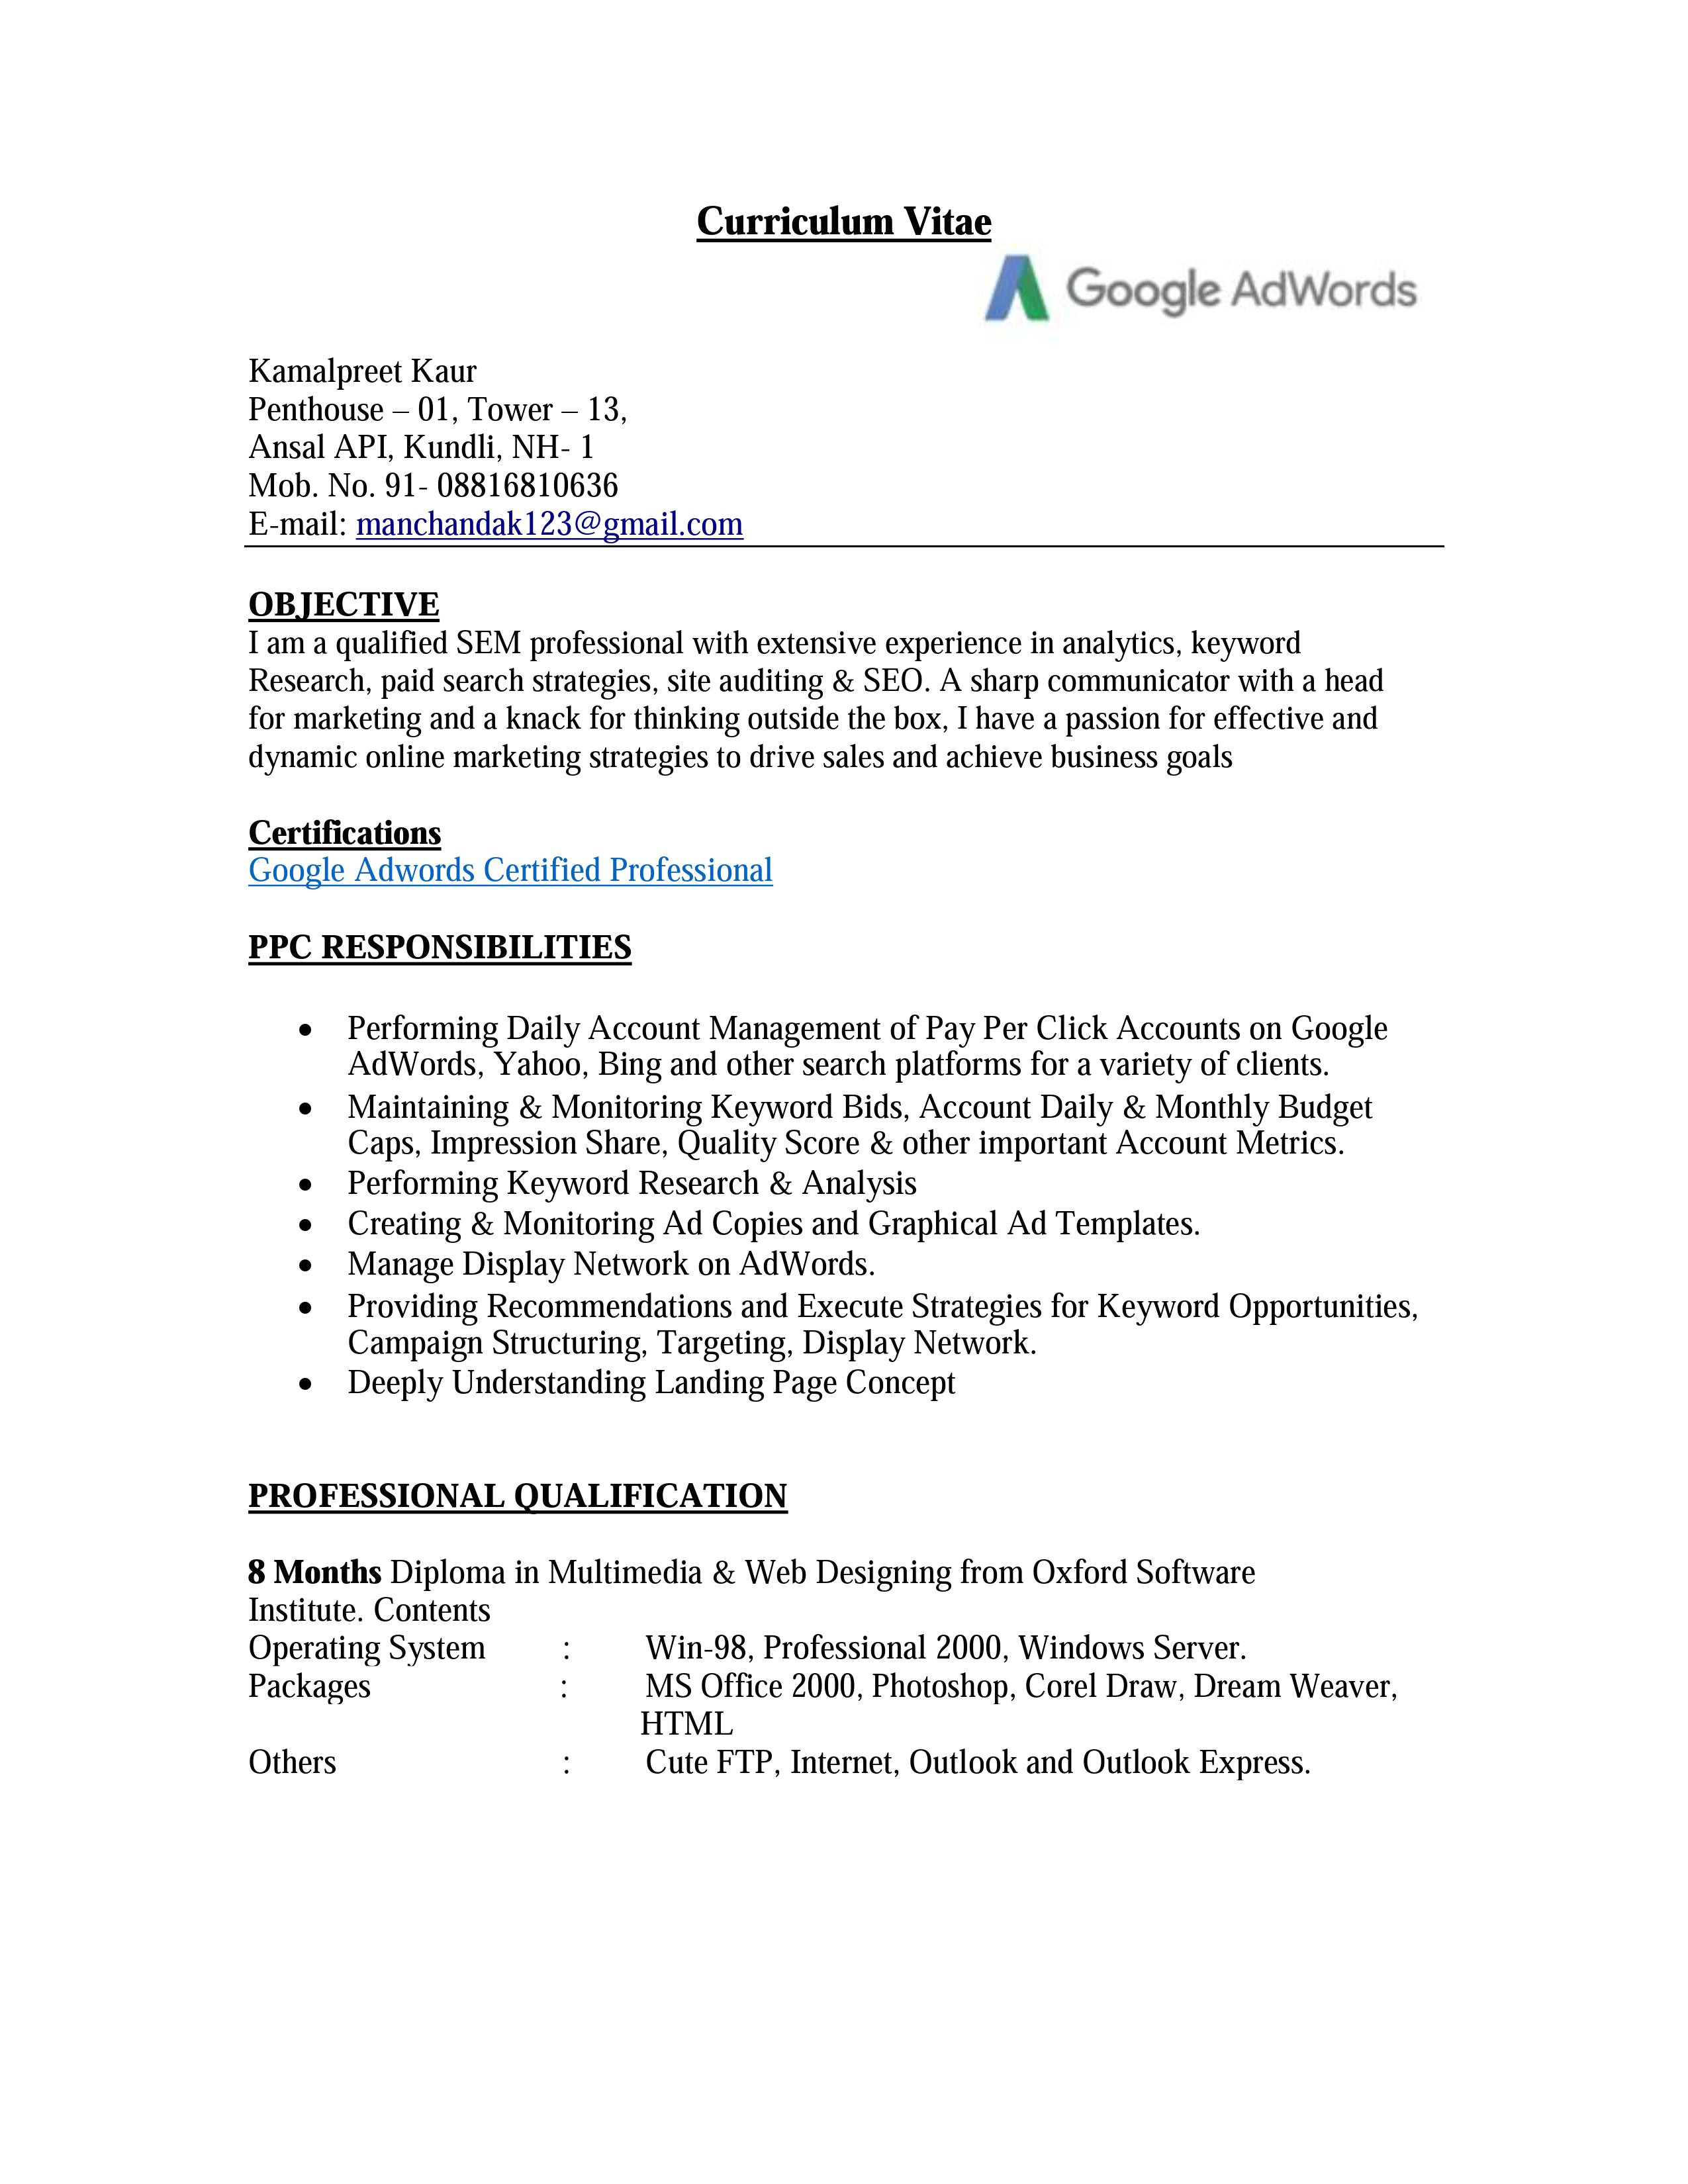 Ppc Resume Sample Know the Essentials Of A Ppc Resume for Job Opportunity